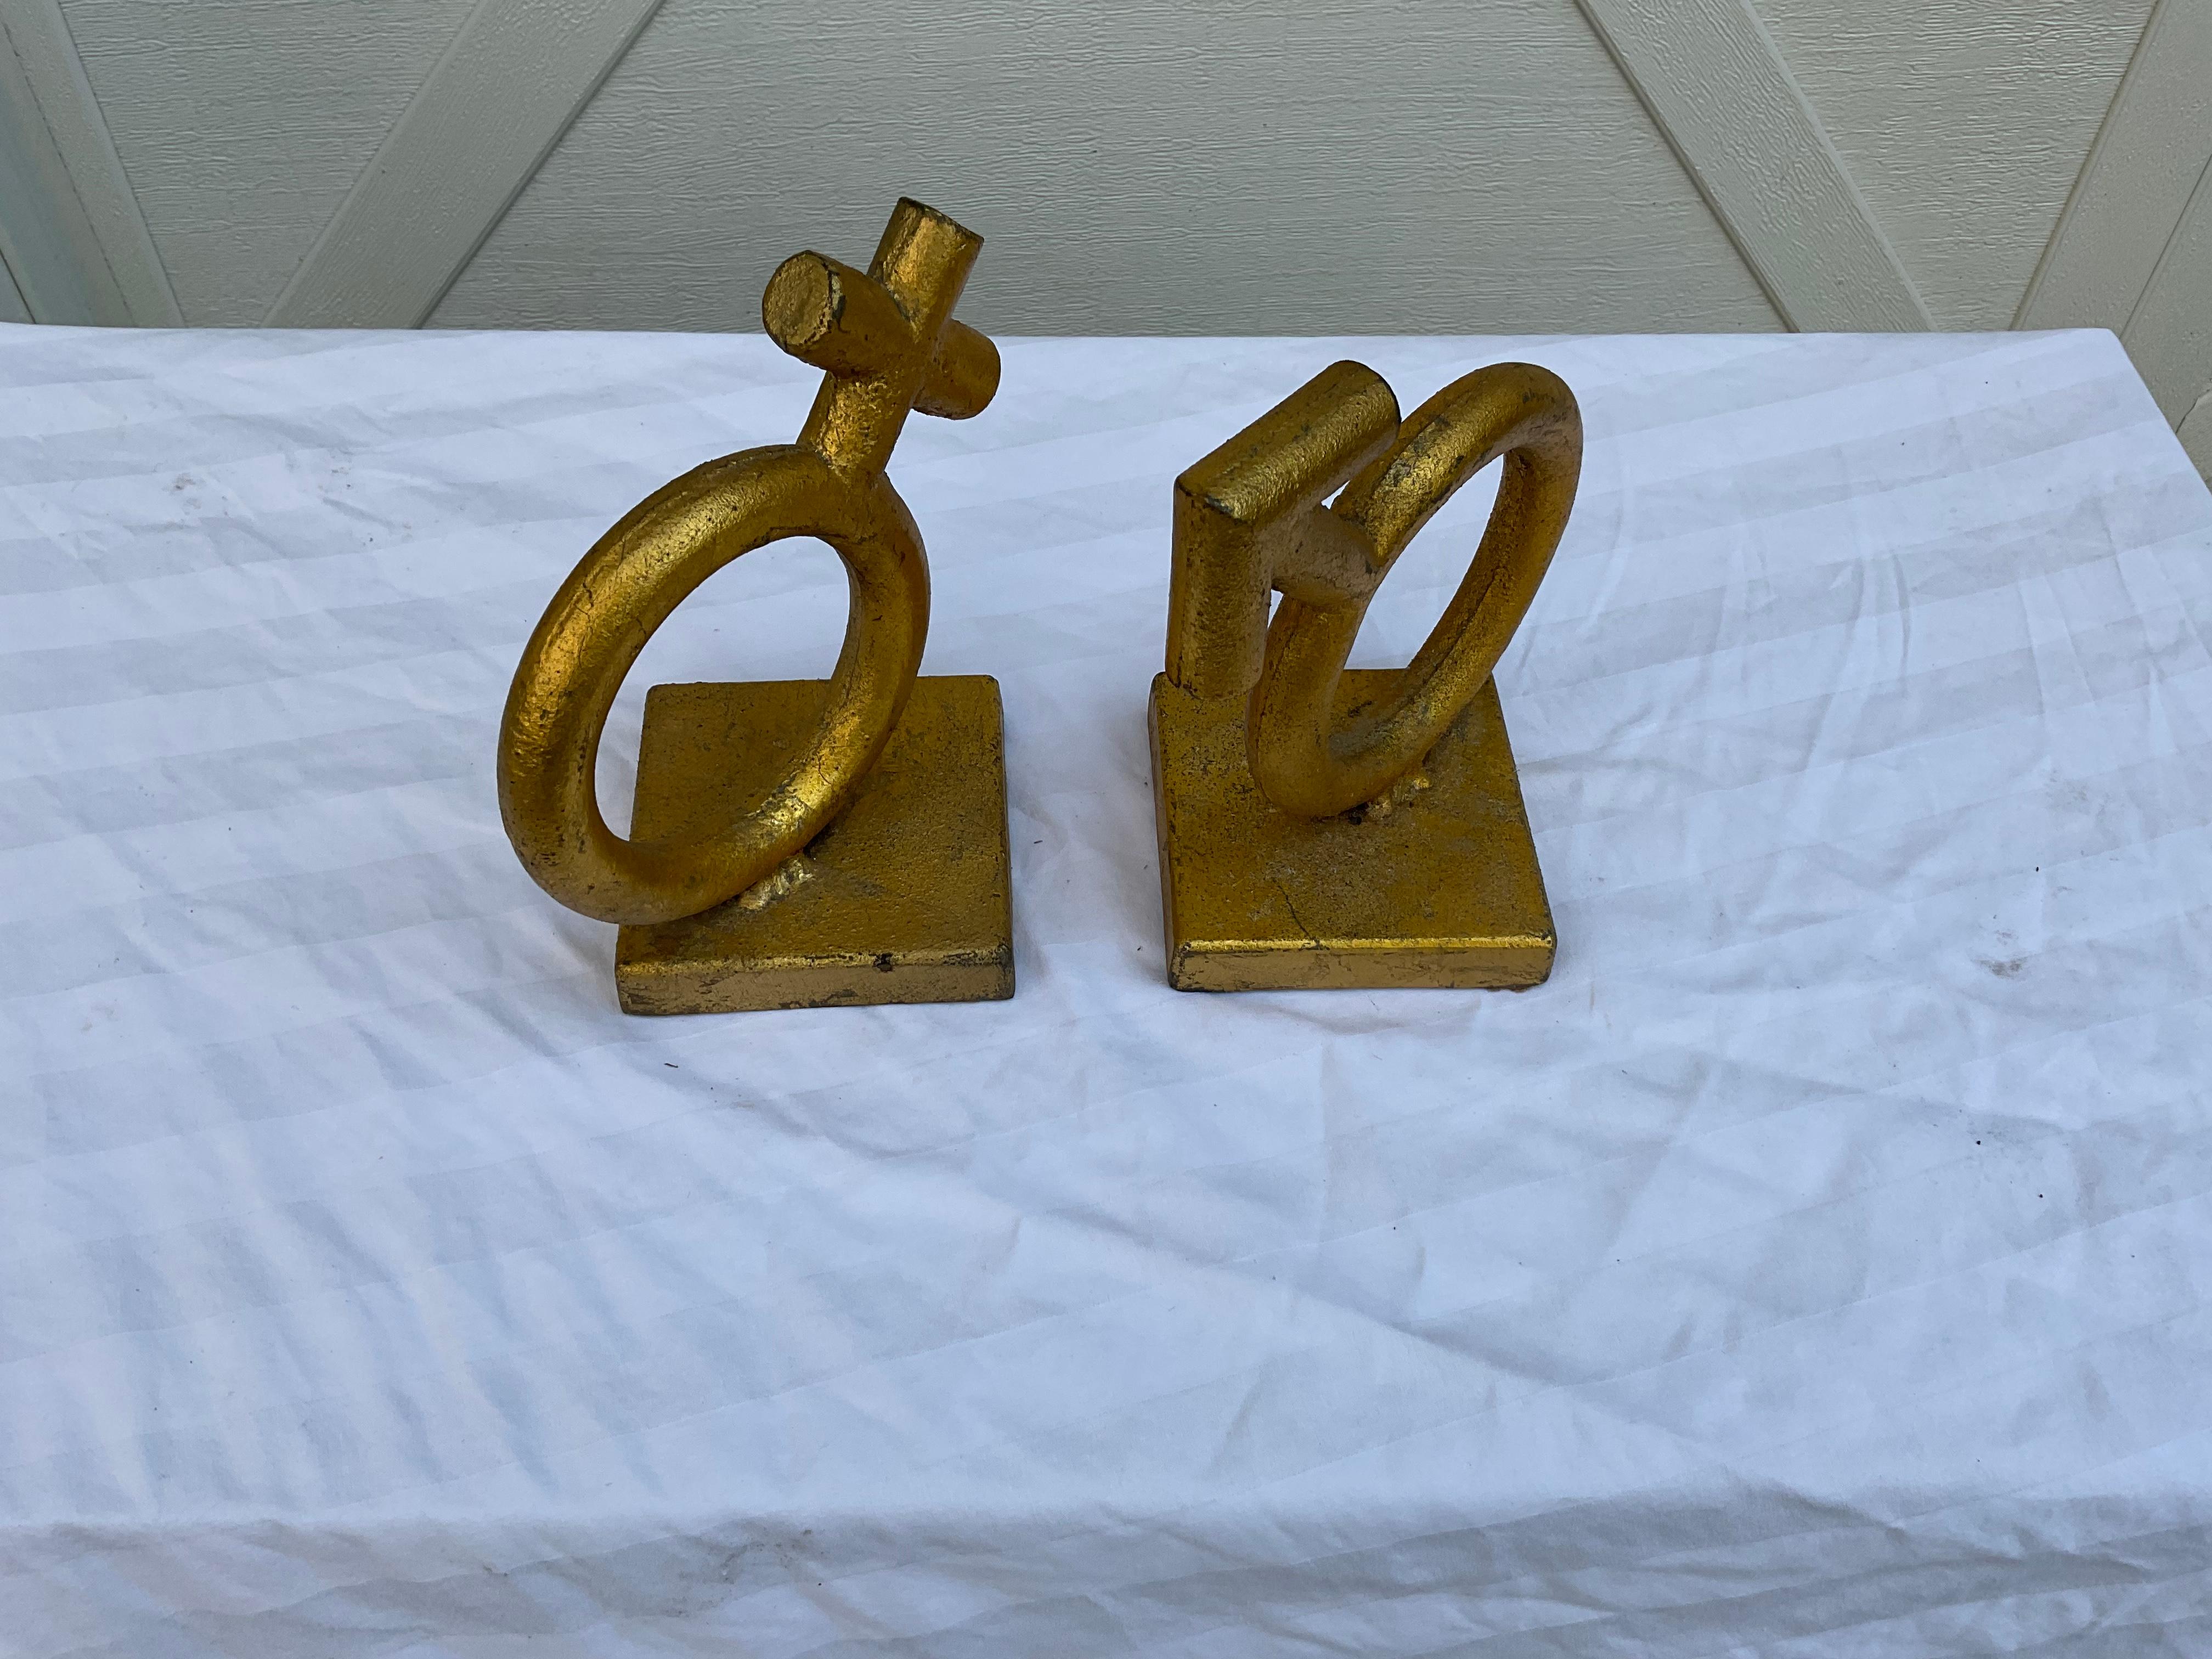 Classic pair of gilt iron bookends, signed C Jere, 1968. One, the sign for female, and one, the sign for male. Heavy enough to actually hold books, or just use, decoratively.